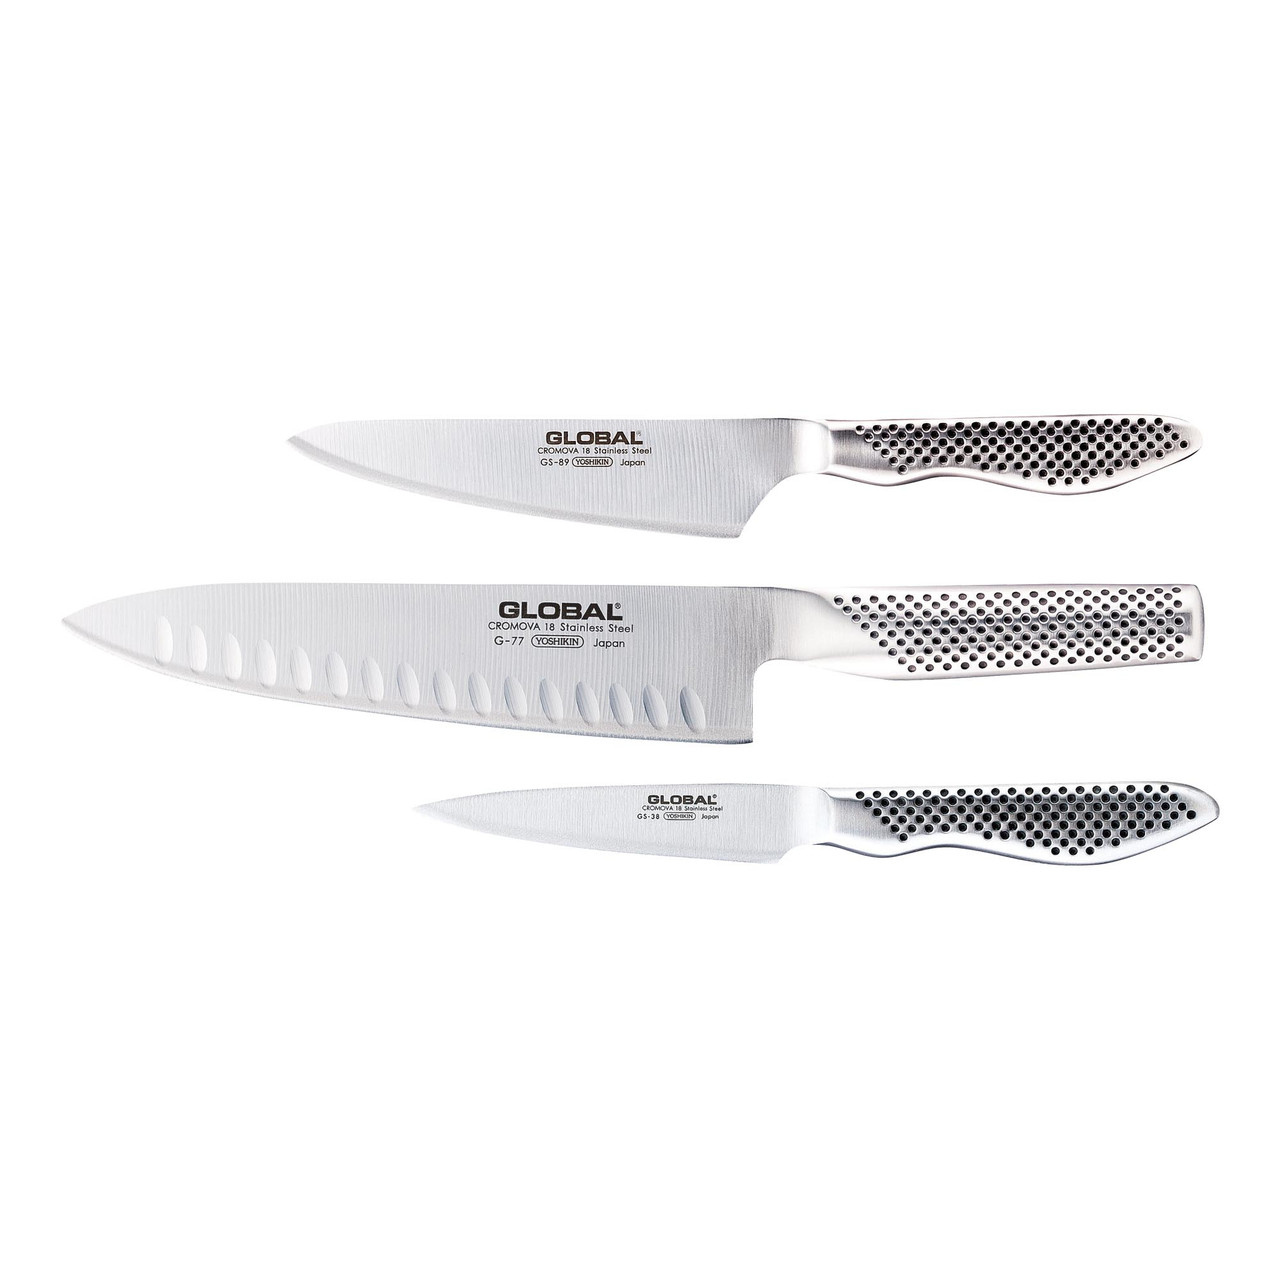 Classic 3 Piece Knife Set with Fluted Cooks Knife - Global Knives Australia